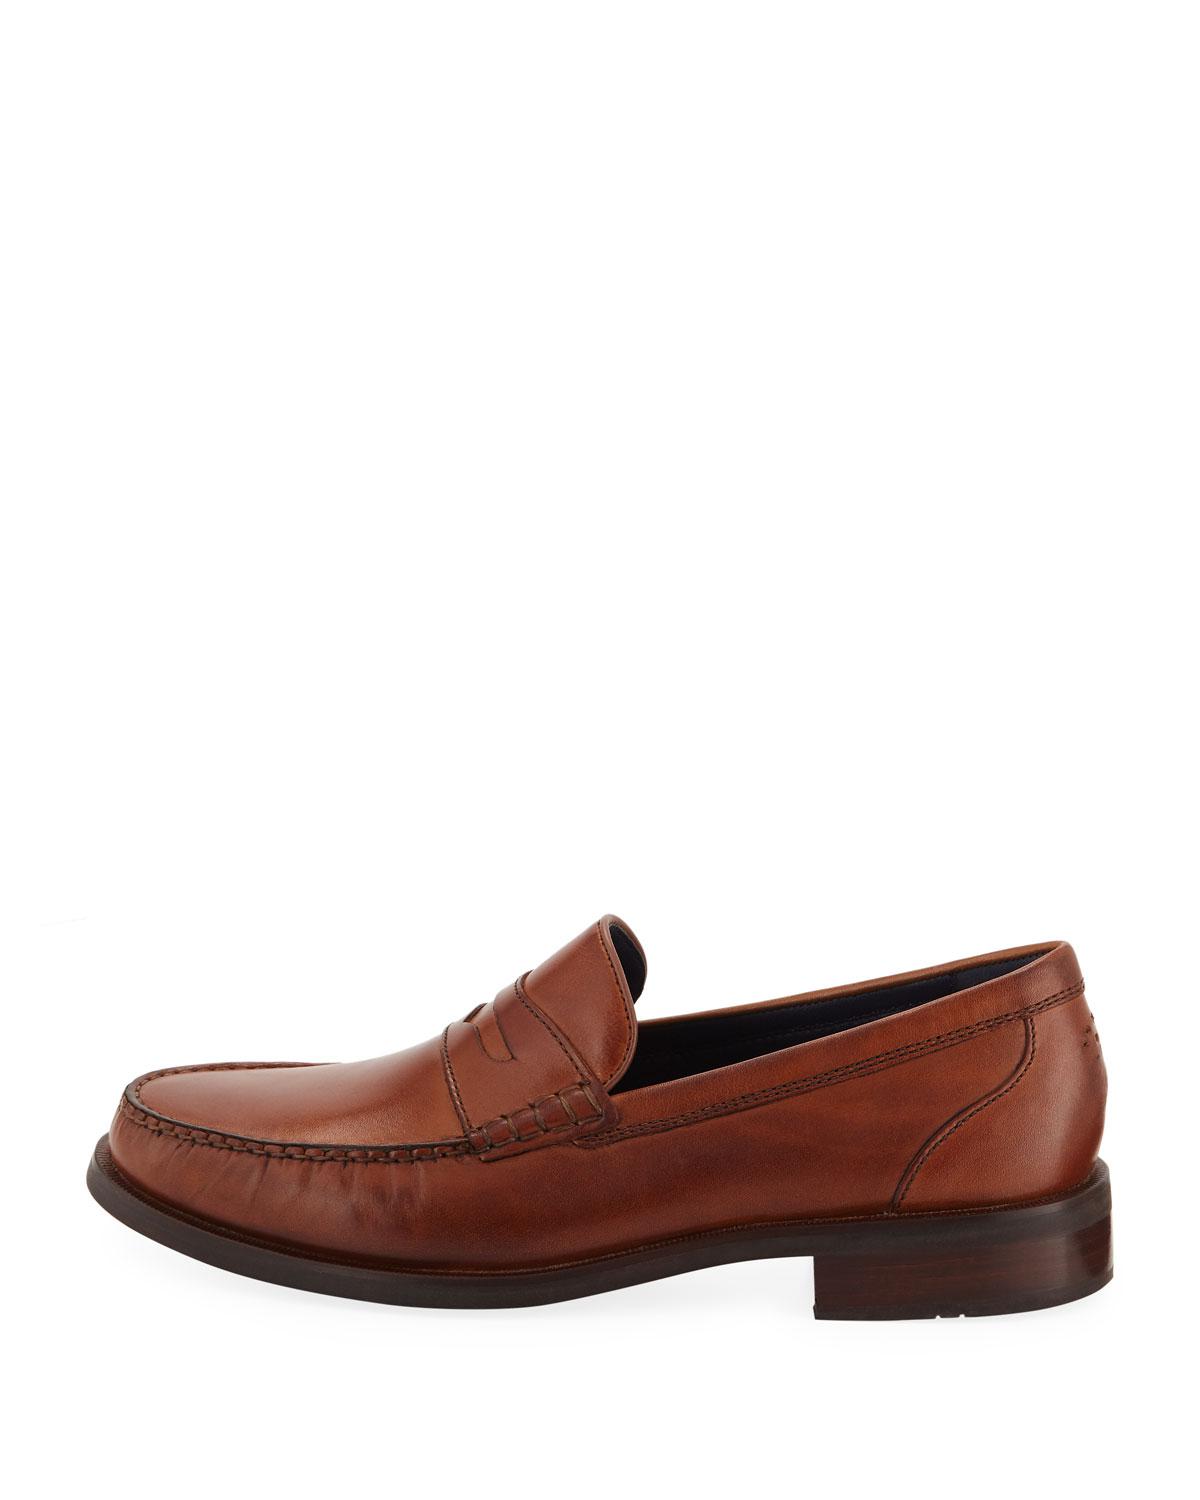 cole haan handsewn penny loafer